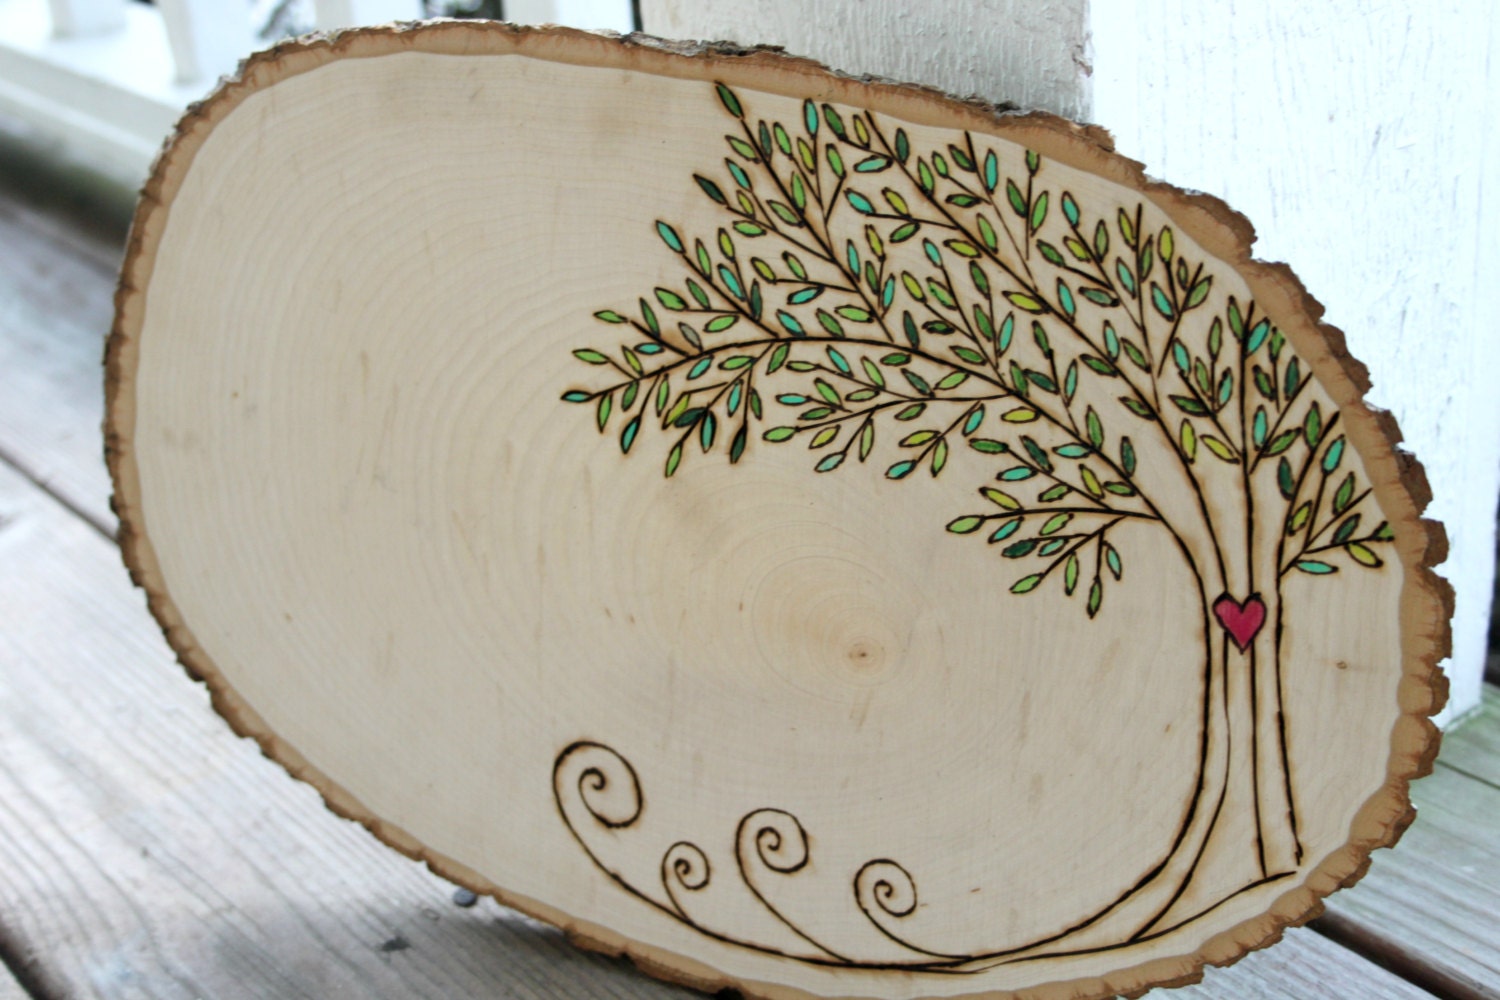 Wedding Guest Book Alternative - Woodburned Tree Slice - Can be personalized